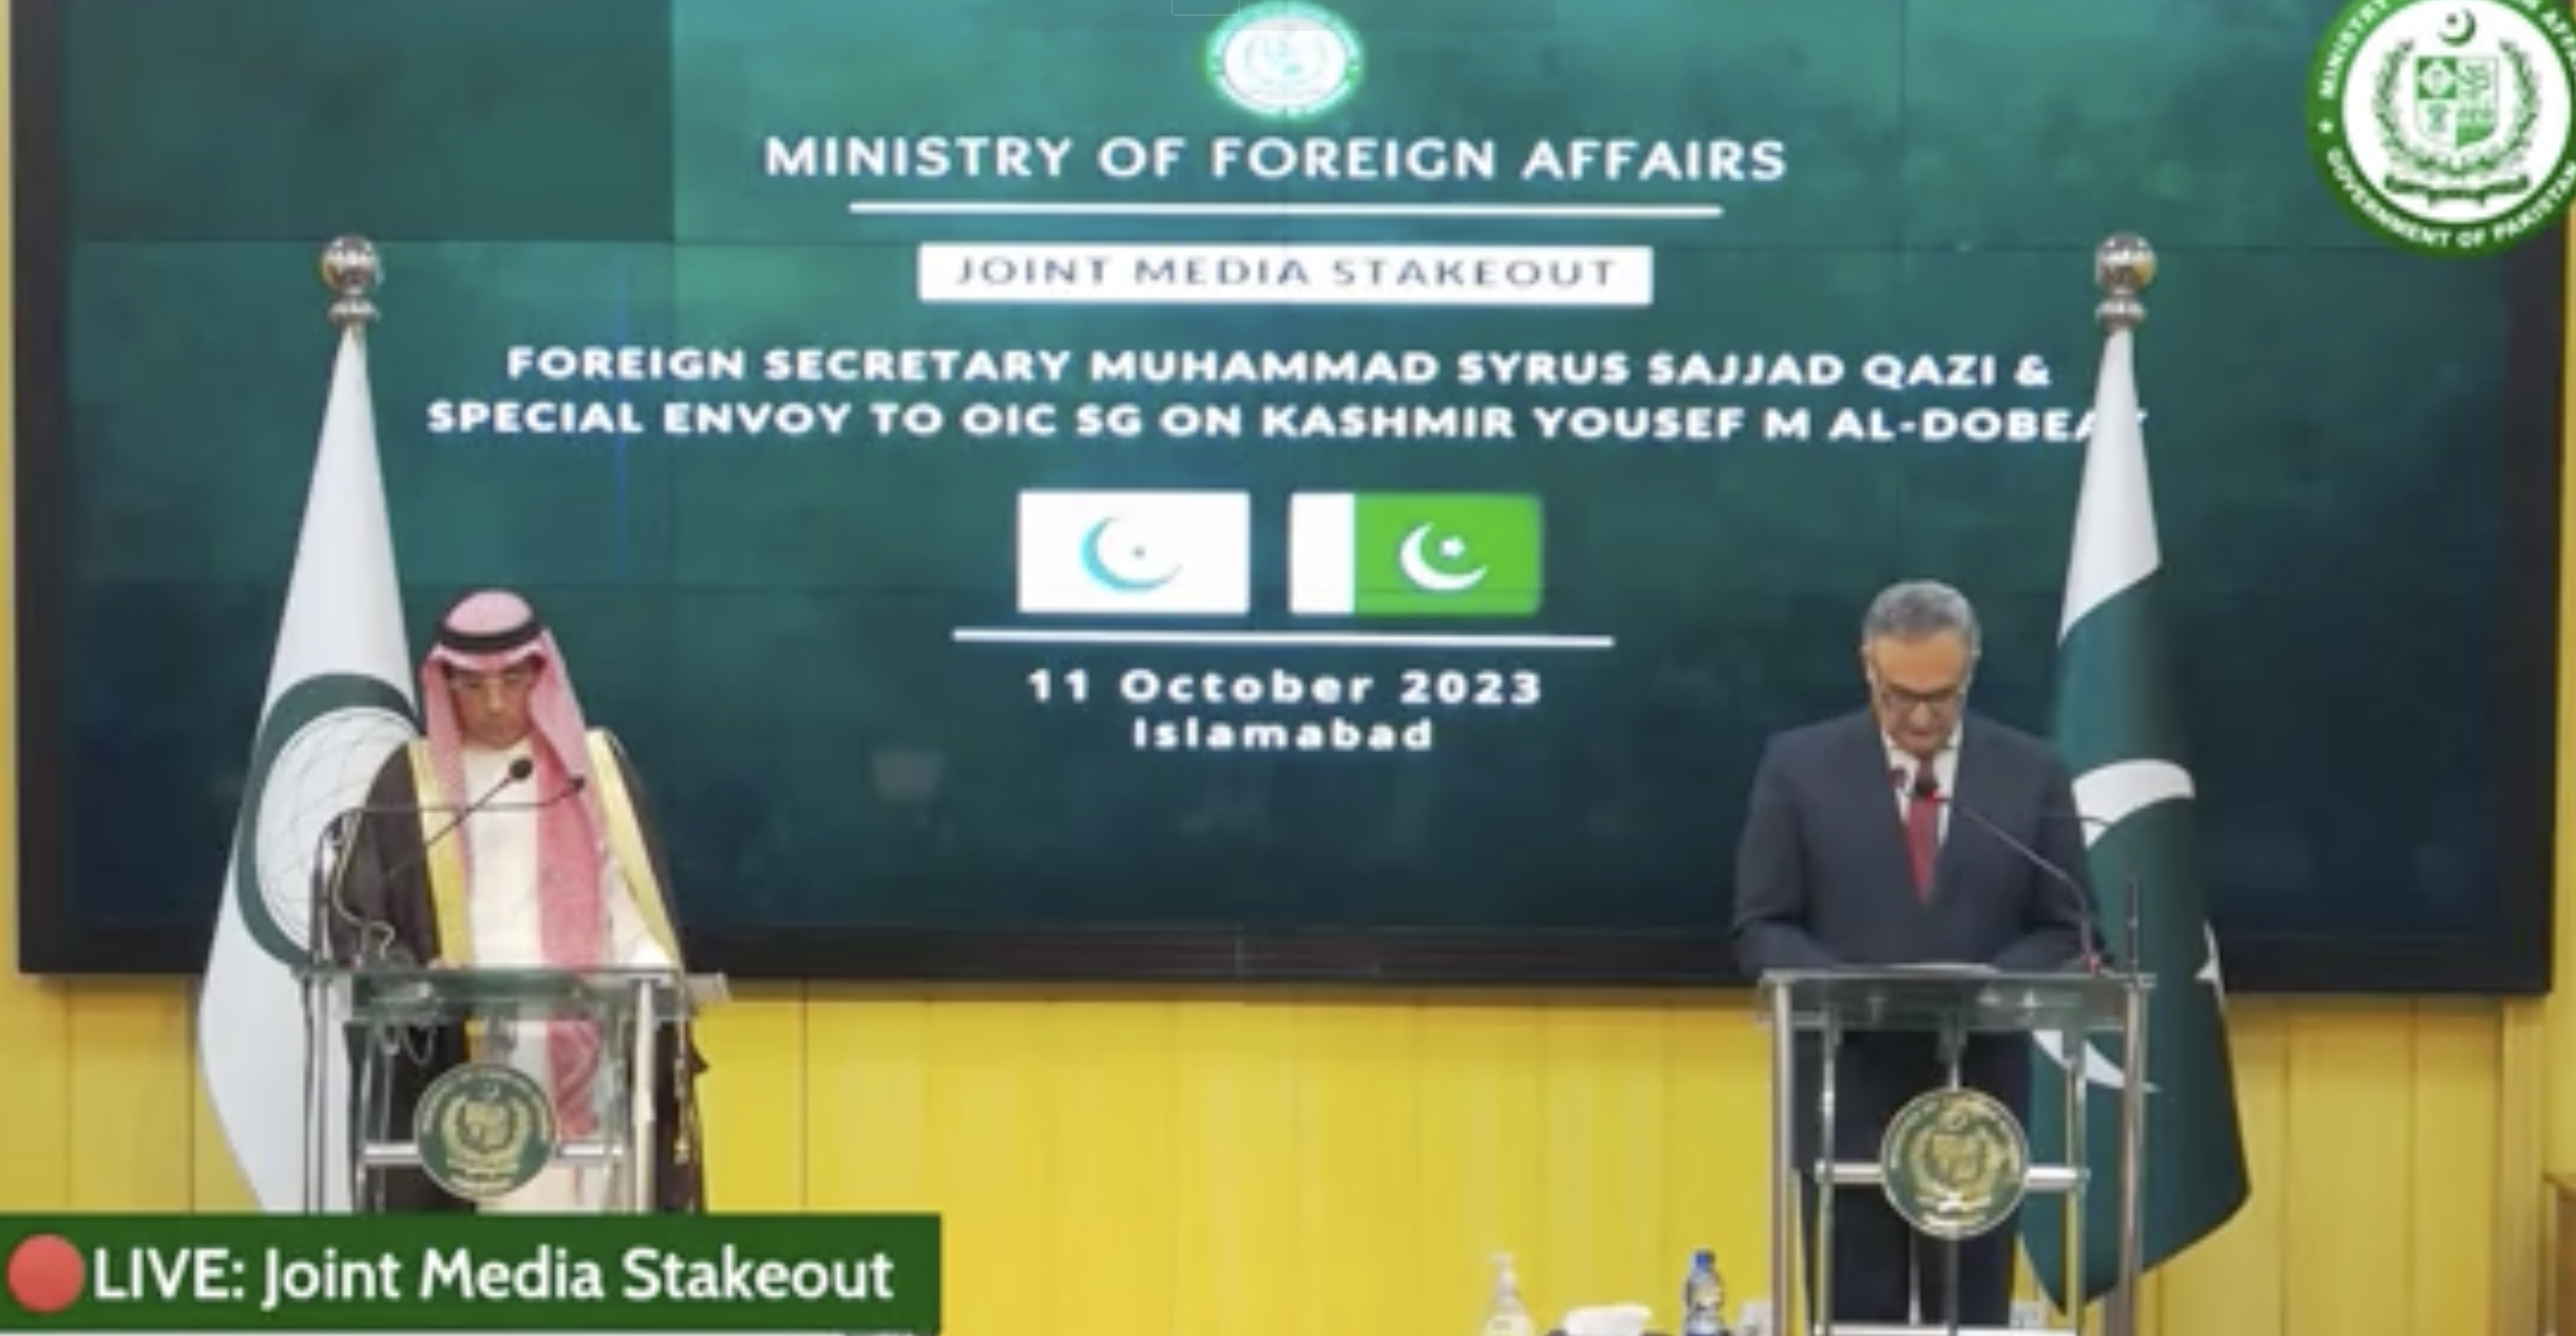 interim fm jalil abbas jilani and oic secretary and special envoy on jammu and kashmir yousef aldobeay address press conference in islamabad on october 11 2023 photo screengrab